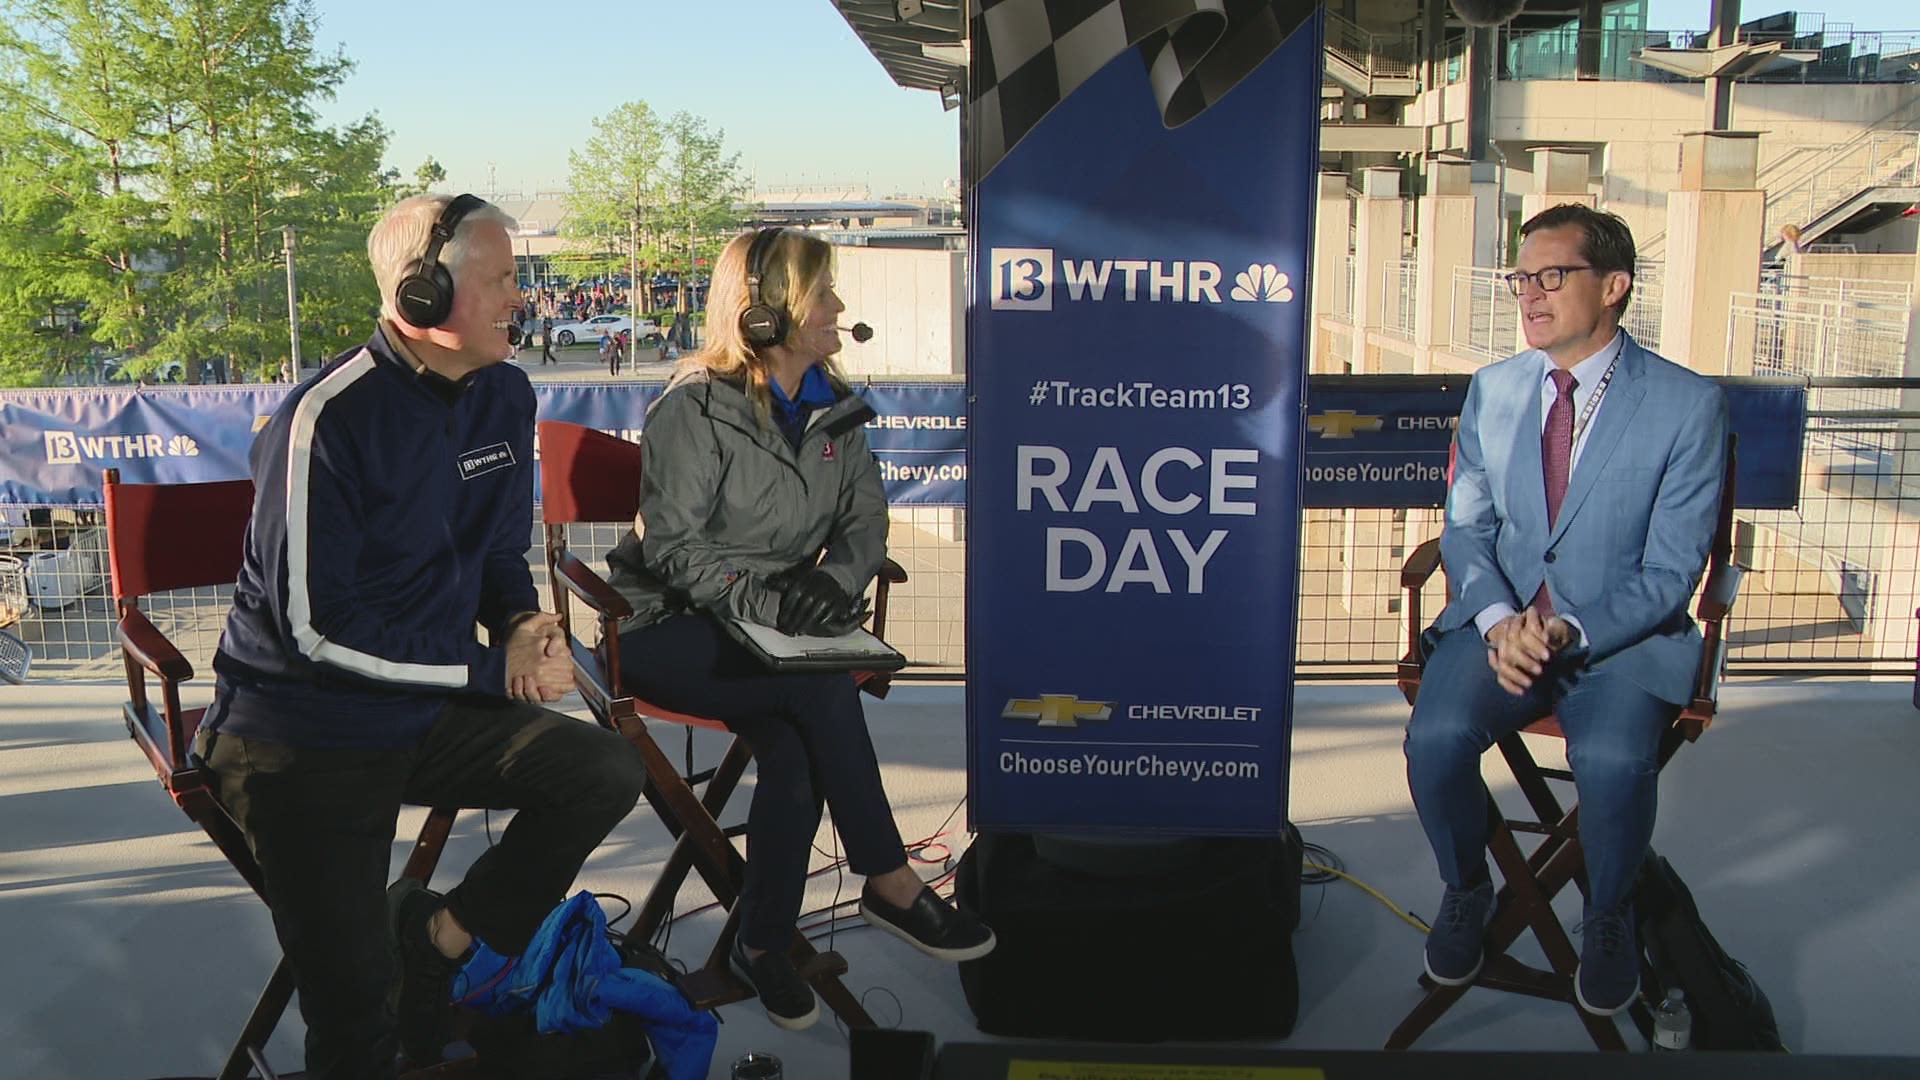 Indianapolis Motor Speedway President Doug Boles joined our TrackTeam13 coverage on Race Day morning.